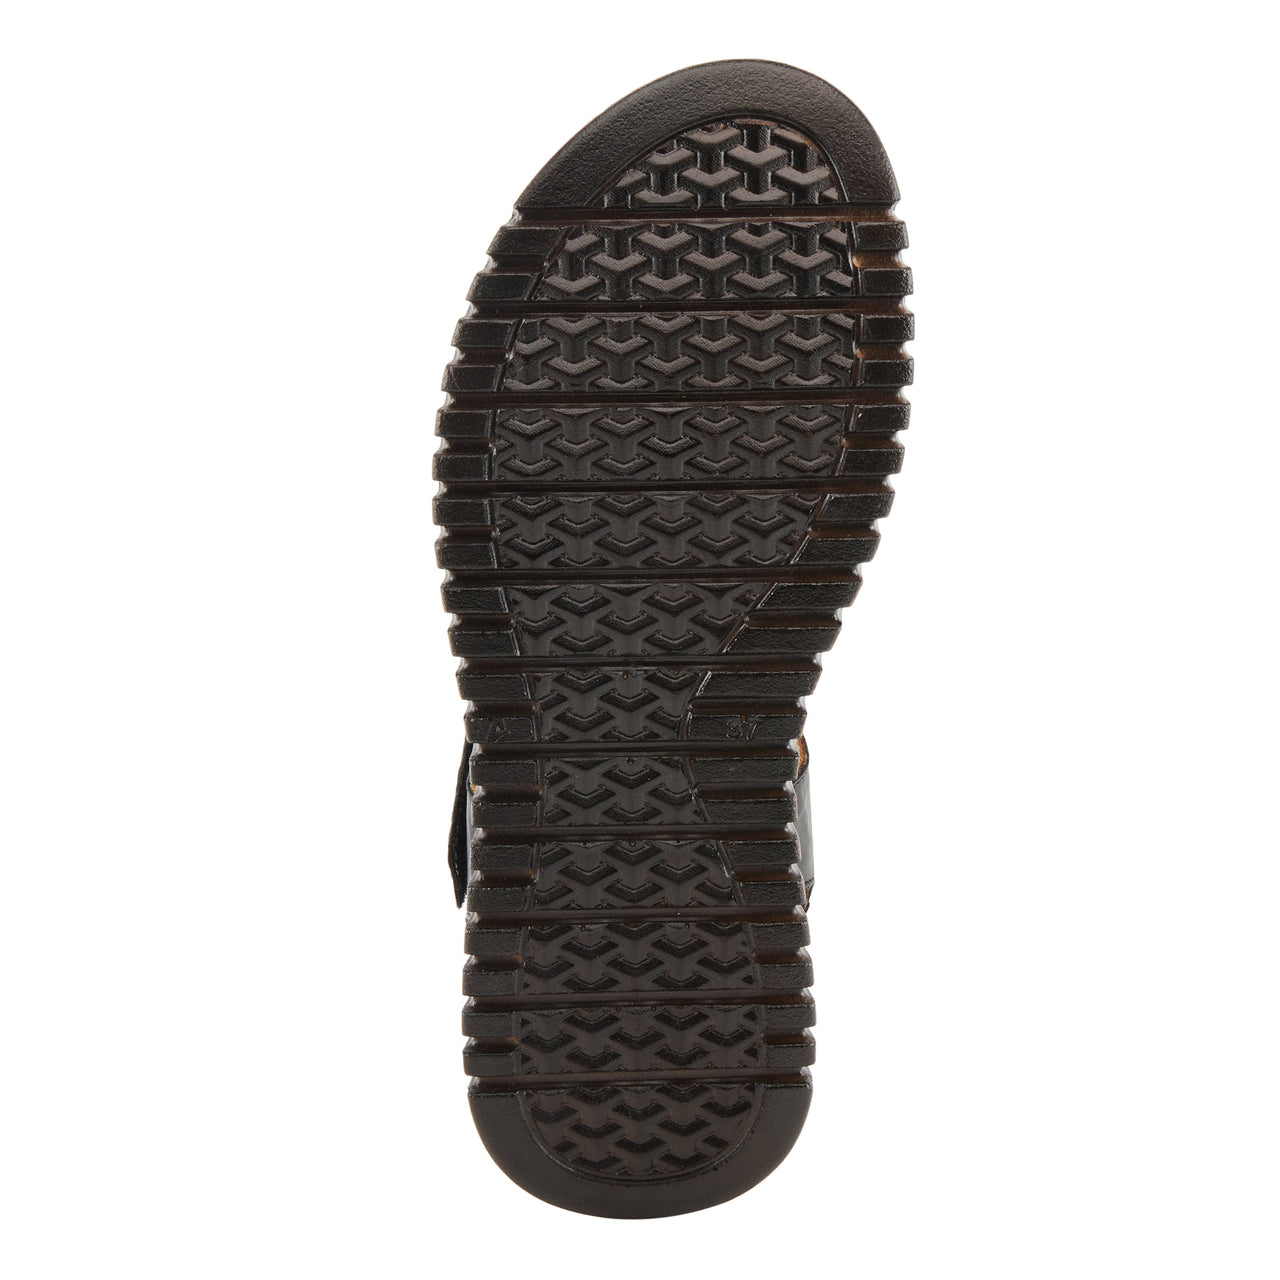 Stylish and comfortable Spring Step Nochella sandals in sleek black leather